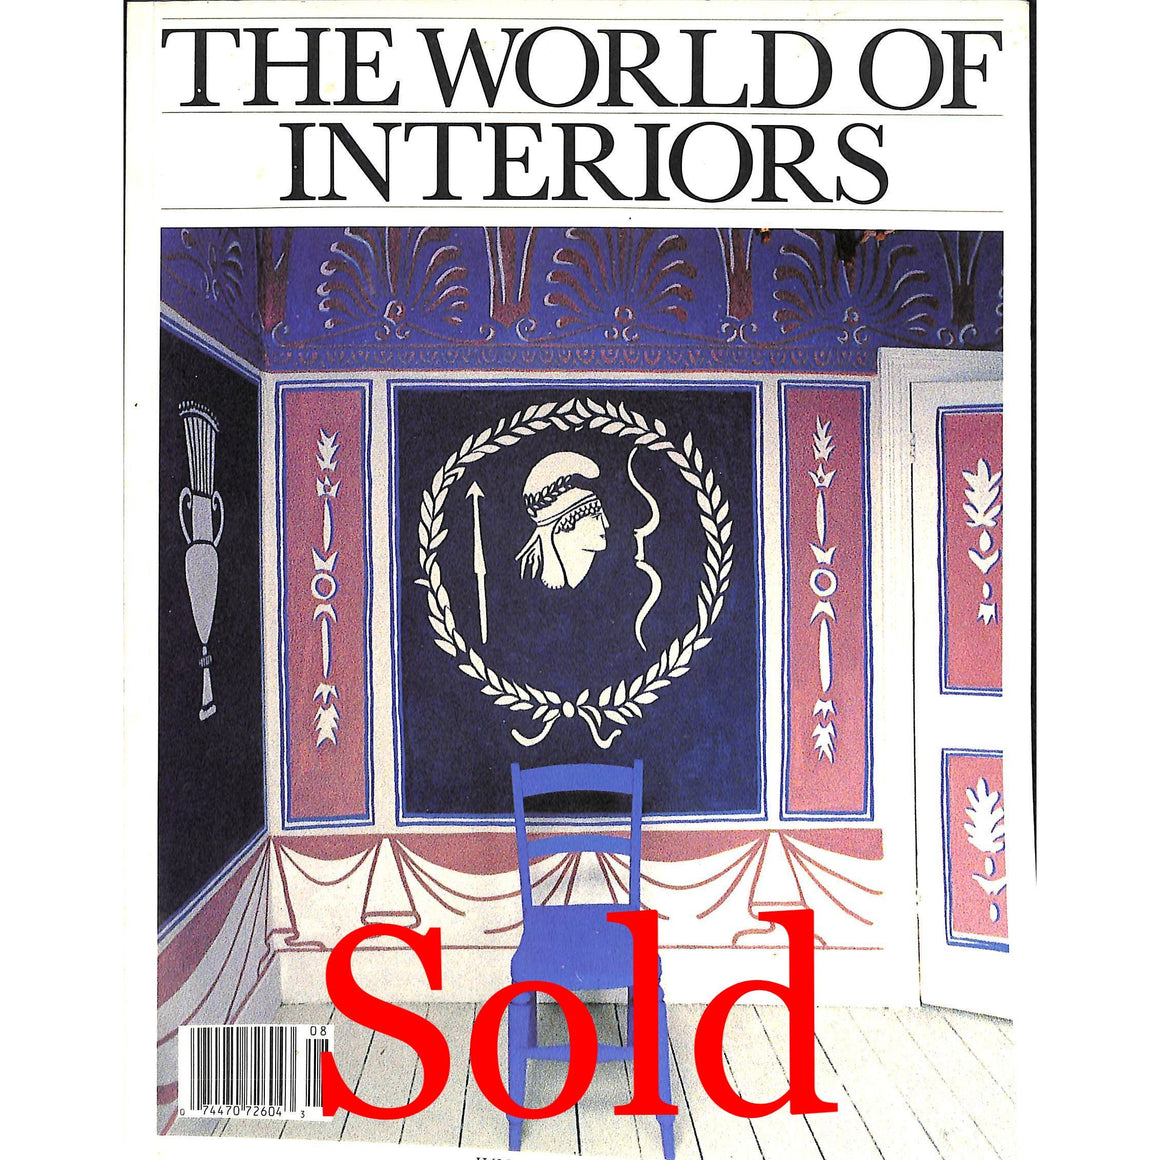 'The World of Interiors July/ August 1988'